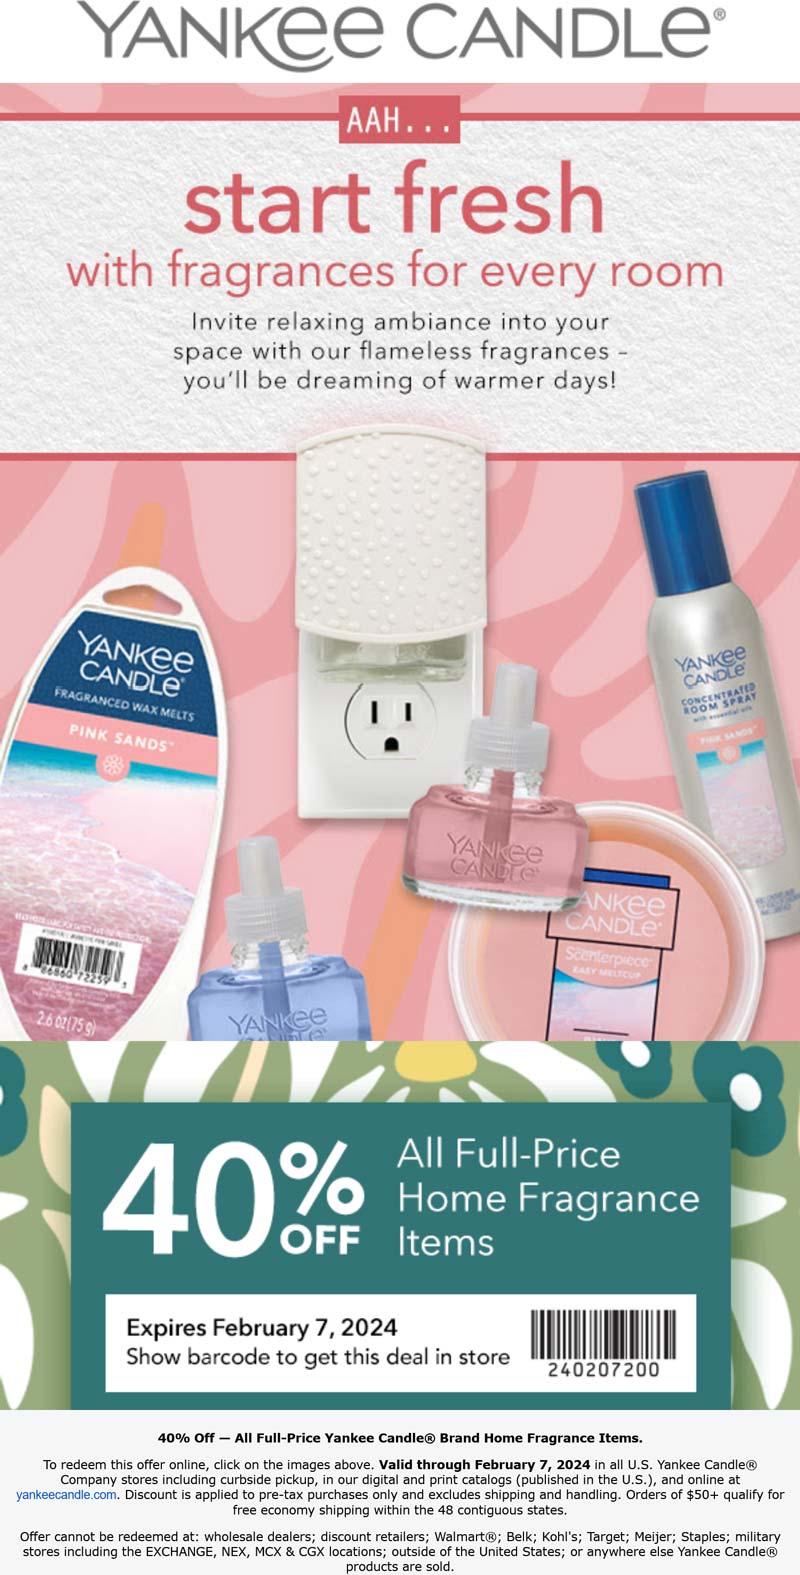 Yankee Candle stores Coupon  40% off home fragrance items at Yankee Candle, ditto online #yankeecandle 